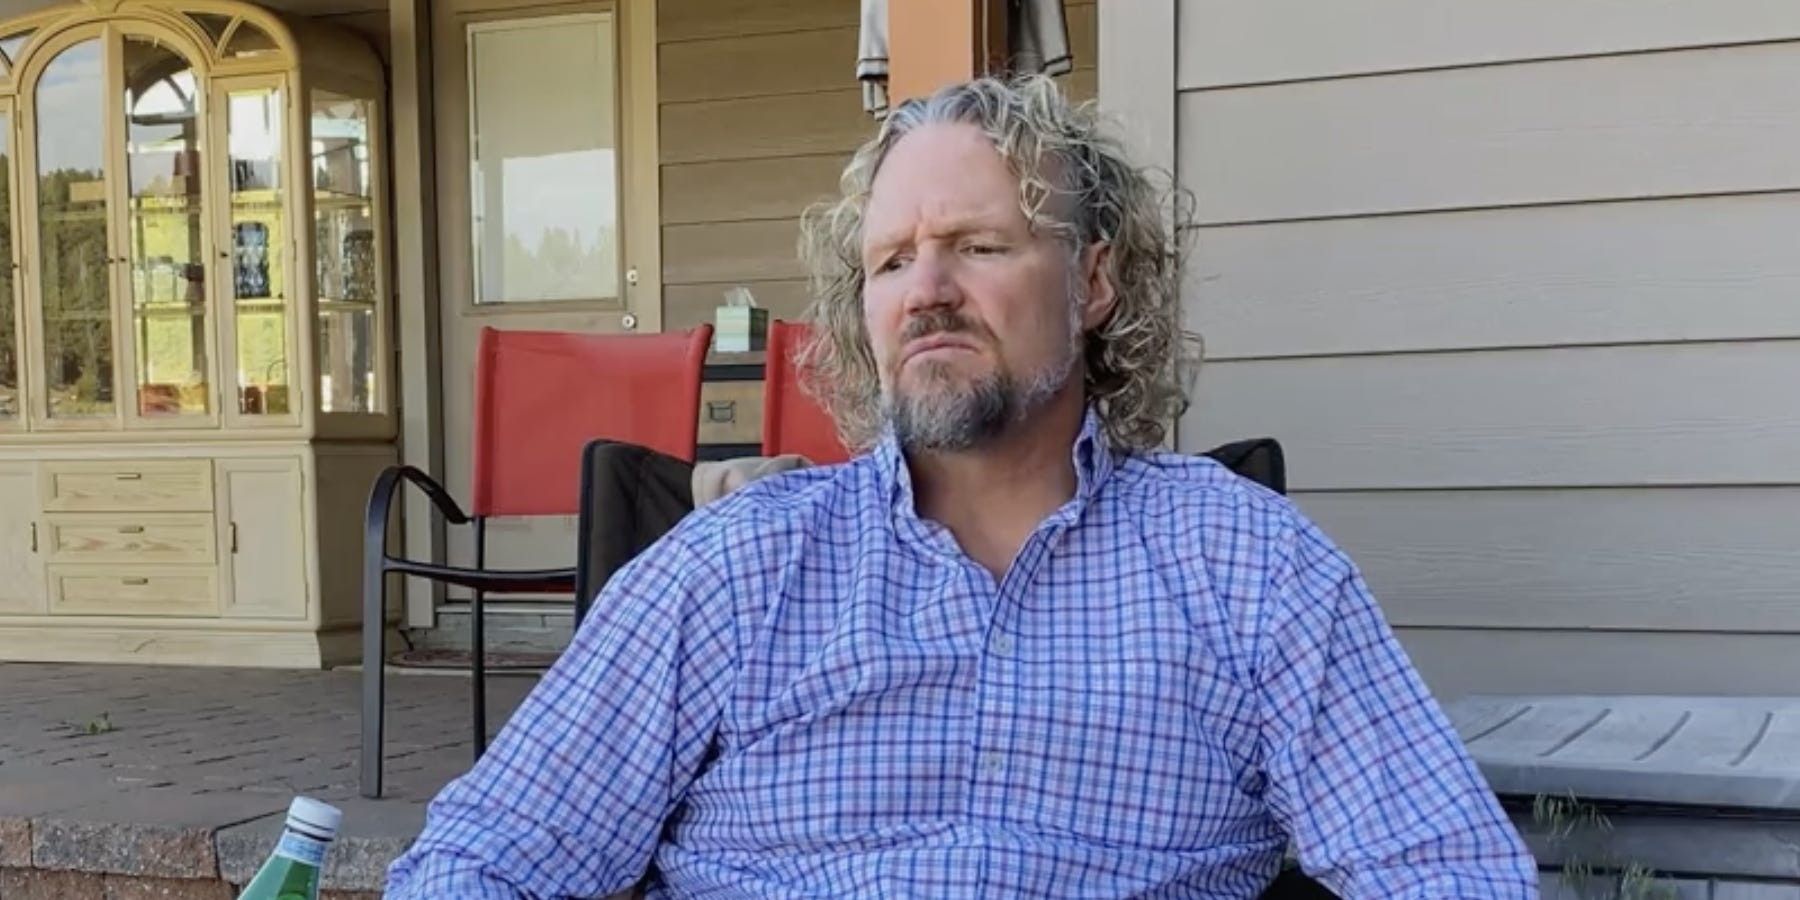 Kody Brown from Sister Wives wearing blue shirt on porch